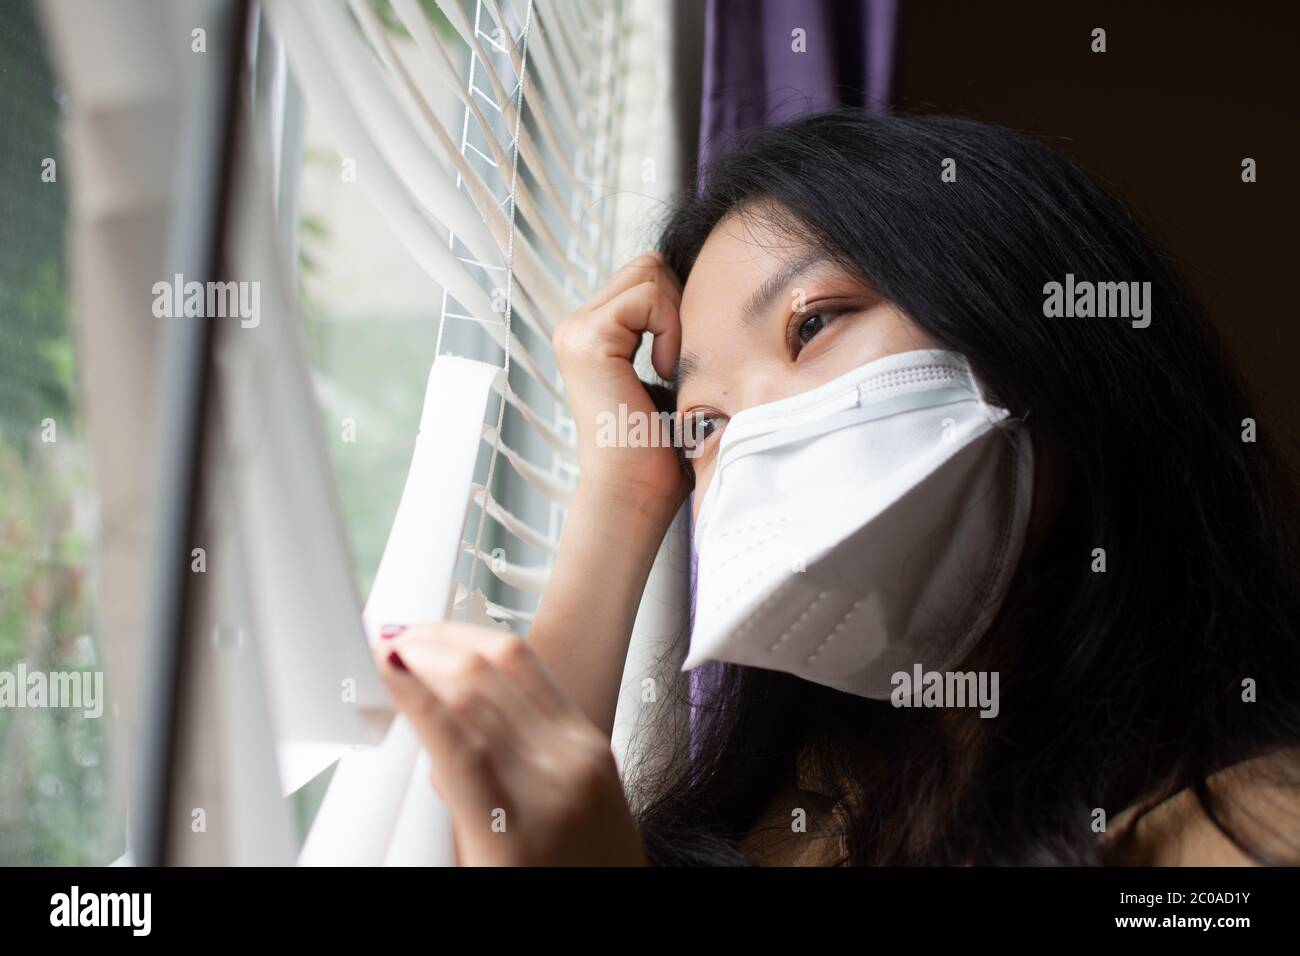 COVID-19 Pandemic Coronavirus Asian Woman Daydreaming Looking Outside During Stay At Home Order Stock Photo